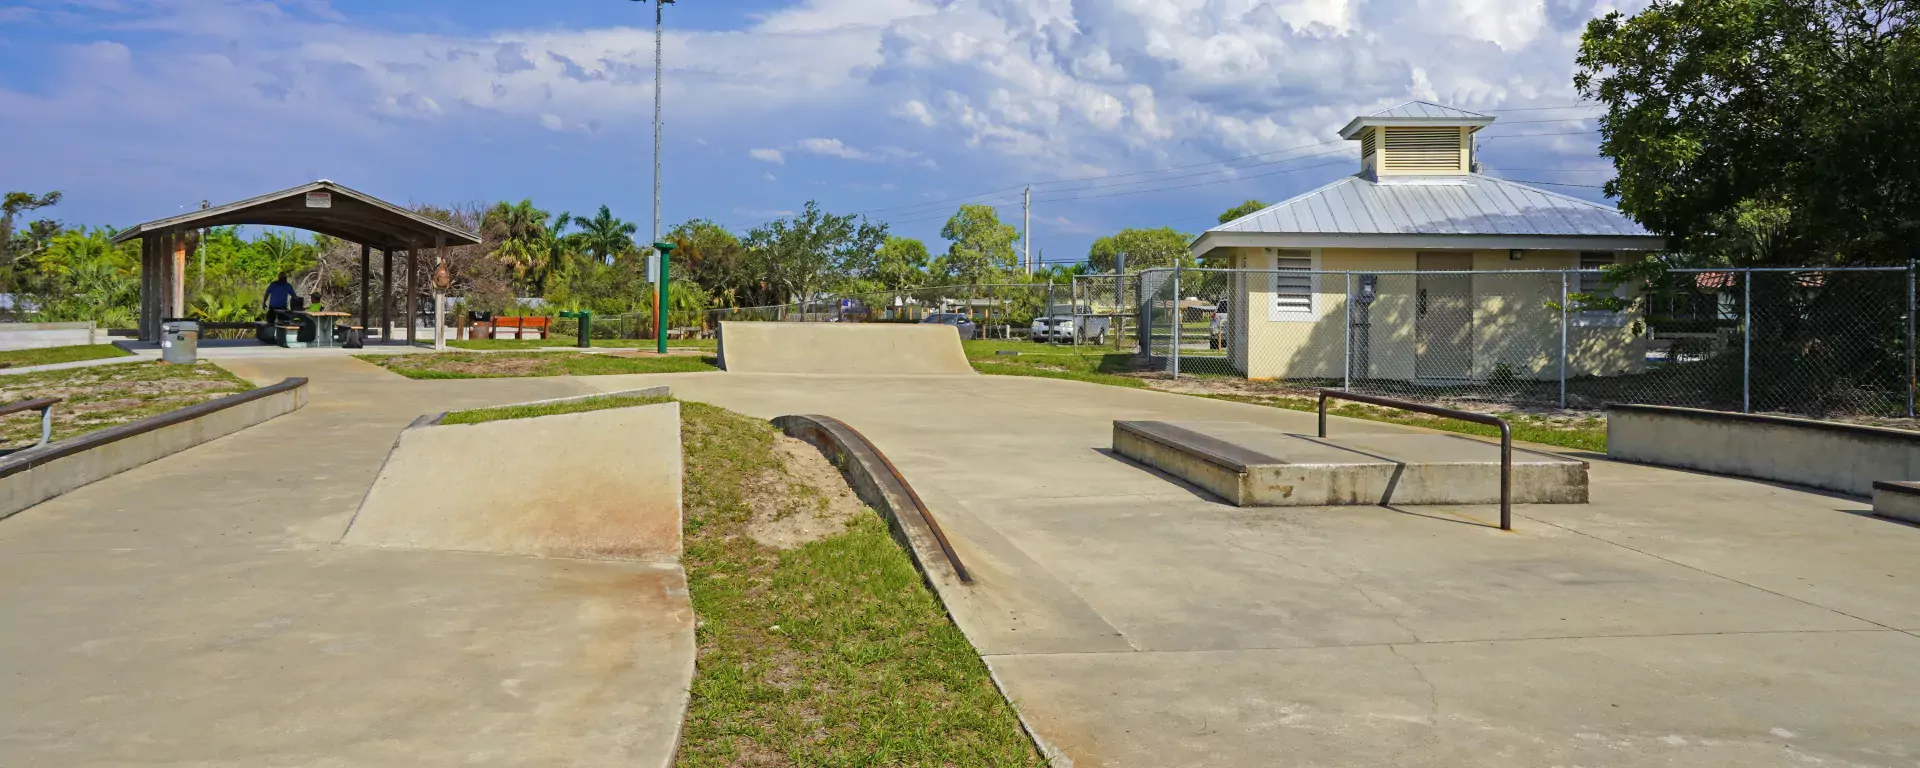 Skate park features at the Rio Skatepark